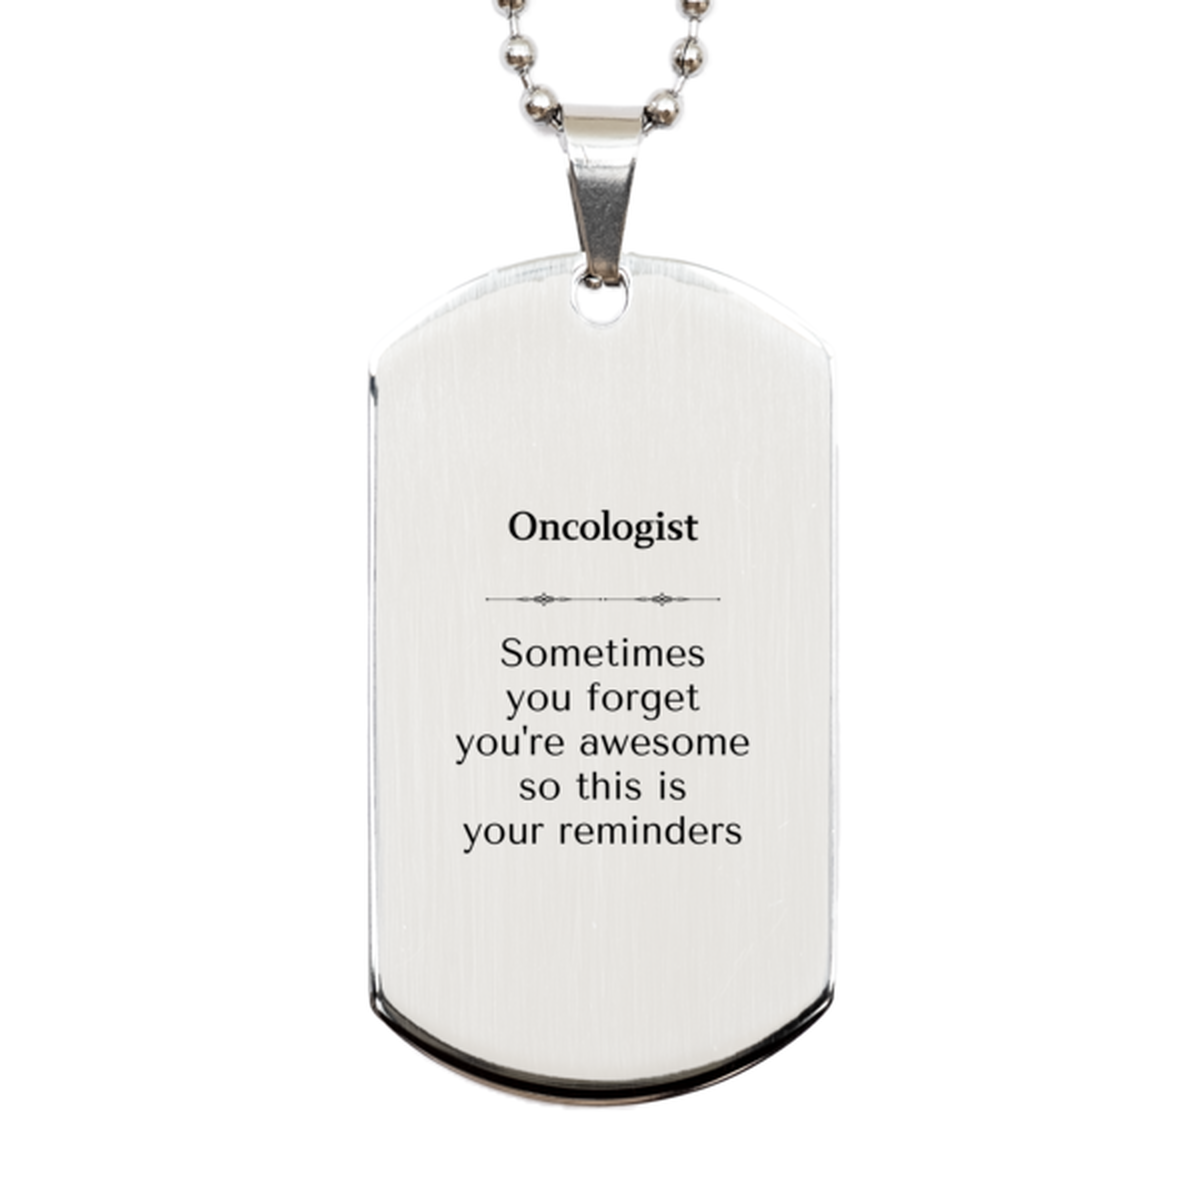 Sentimental Oncologist Silver Dog Tag, Oncologist Sometimes you forget you're awesome so this is your reminders, Graduation Christmas Birthday Gifts for Oncologist, Men, Women, Coworkers